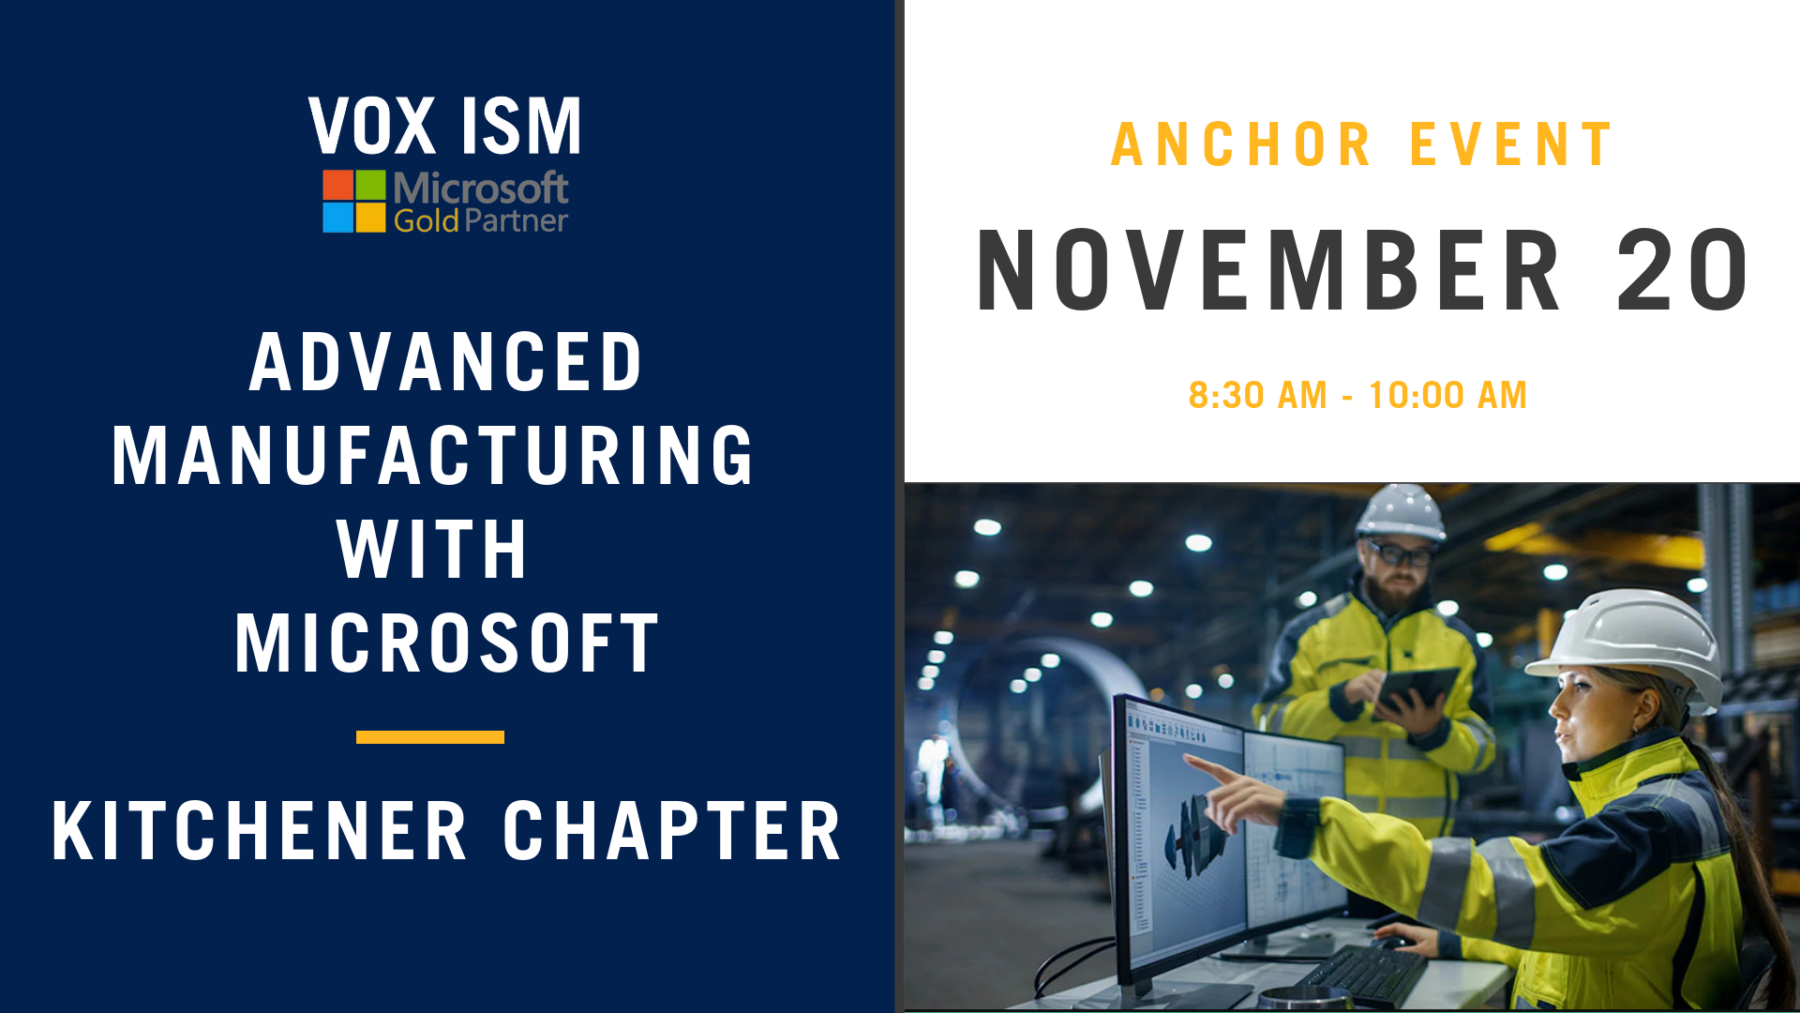 Advanced Manufacturing with Microsoft - Kitchener Chapter - November 20